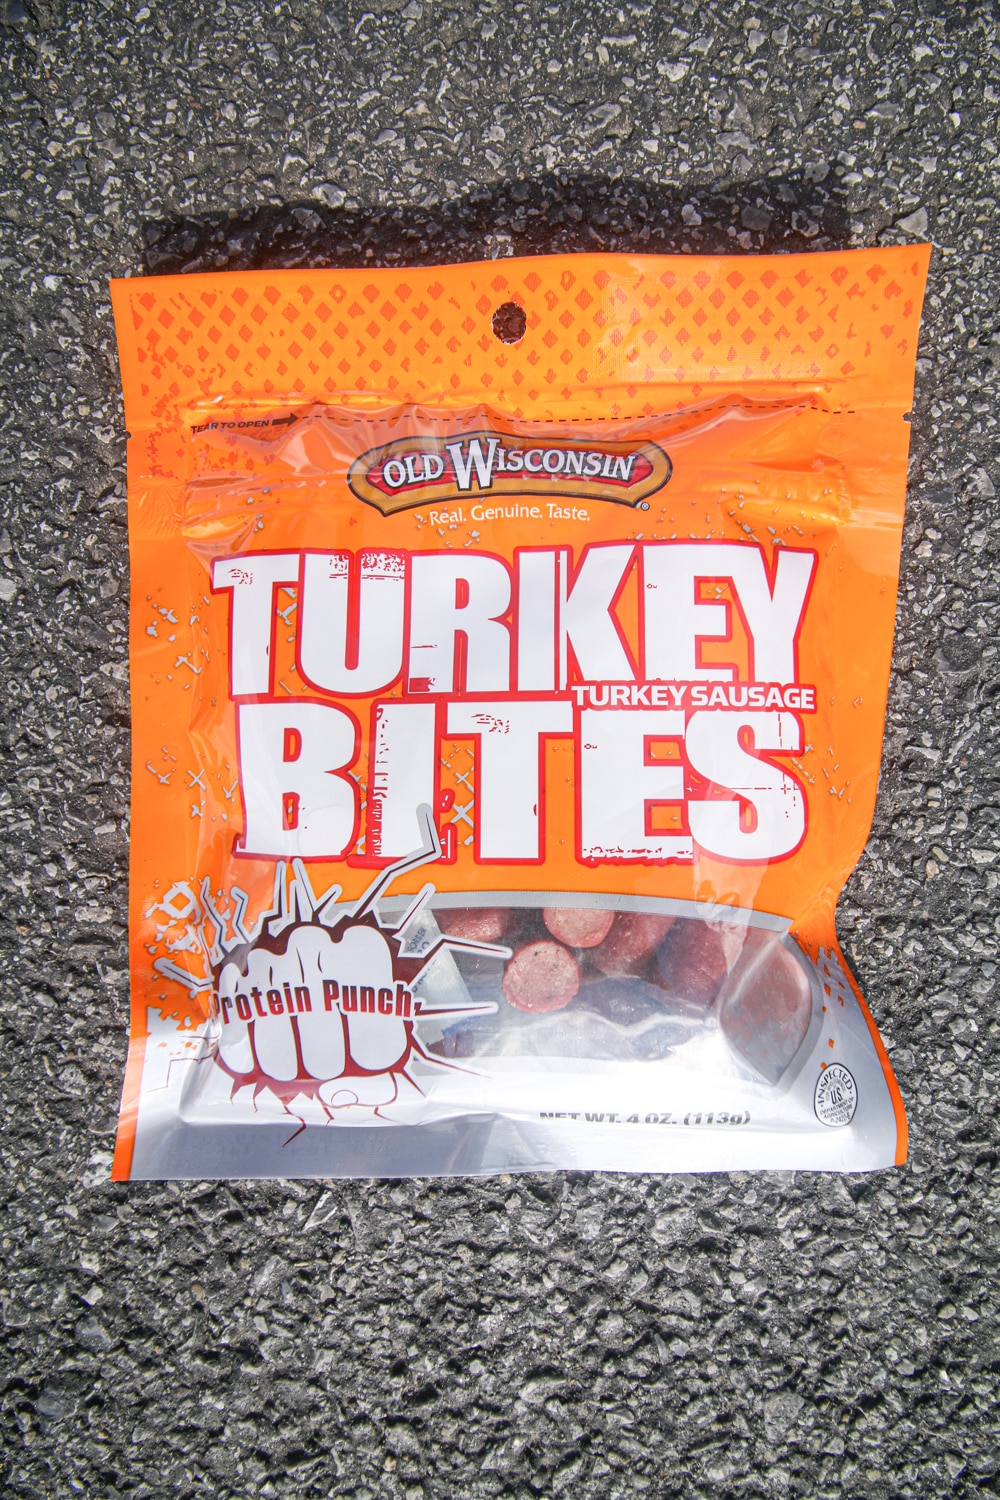 A package of turkey bites.